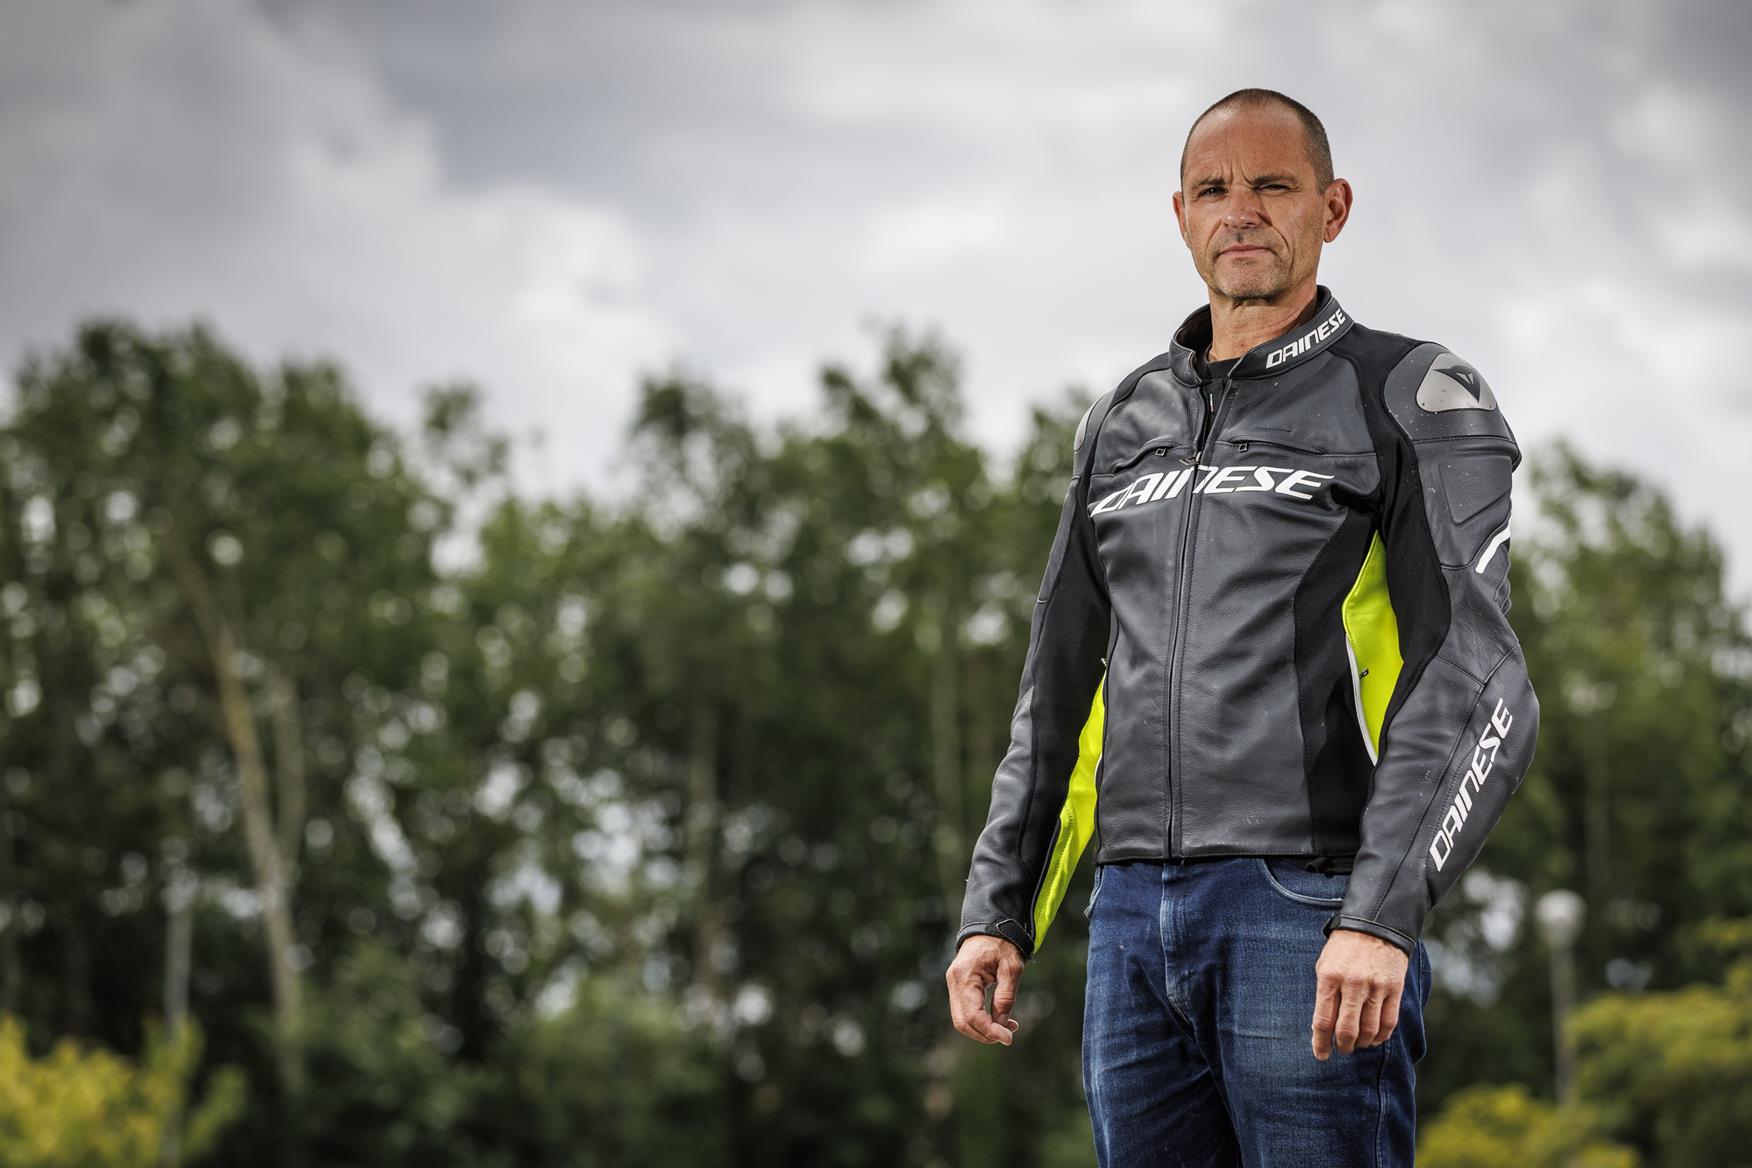 Tried and tested: Dainese Racing 3 jacket review